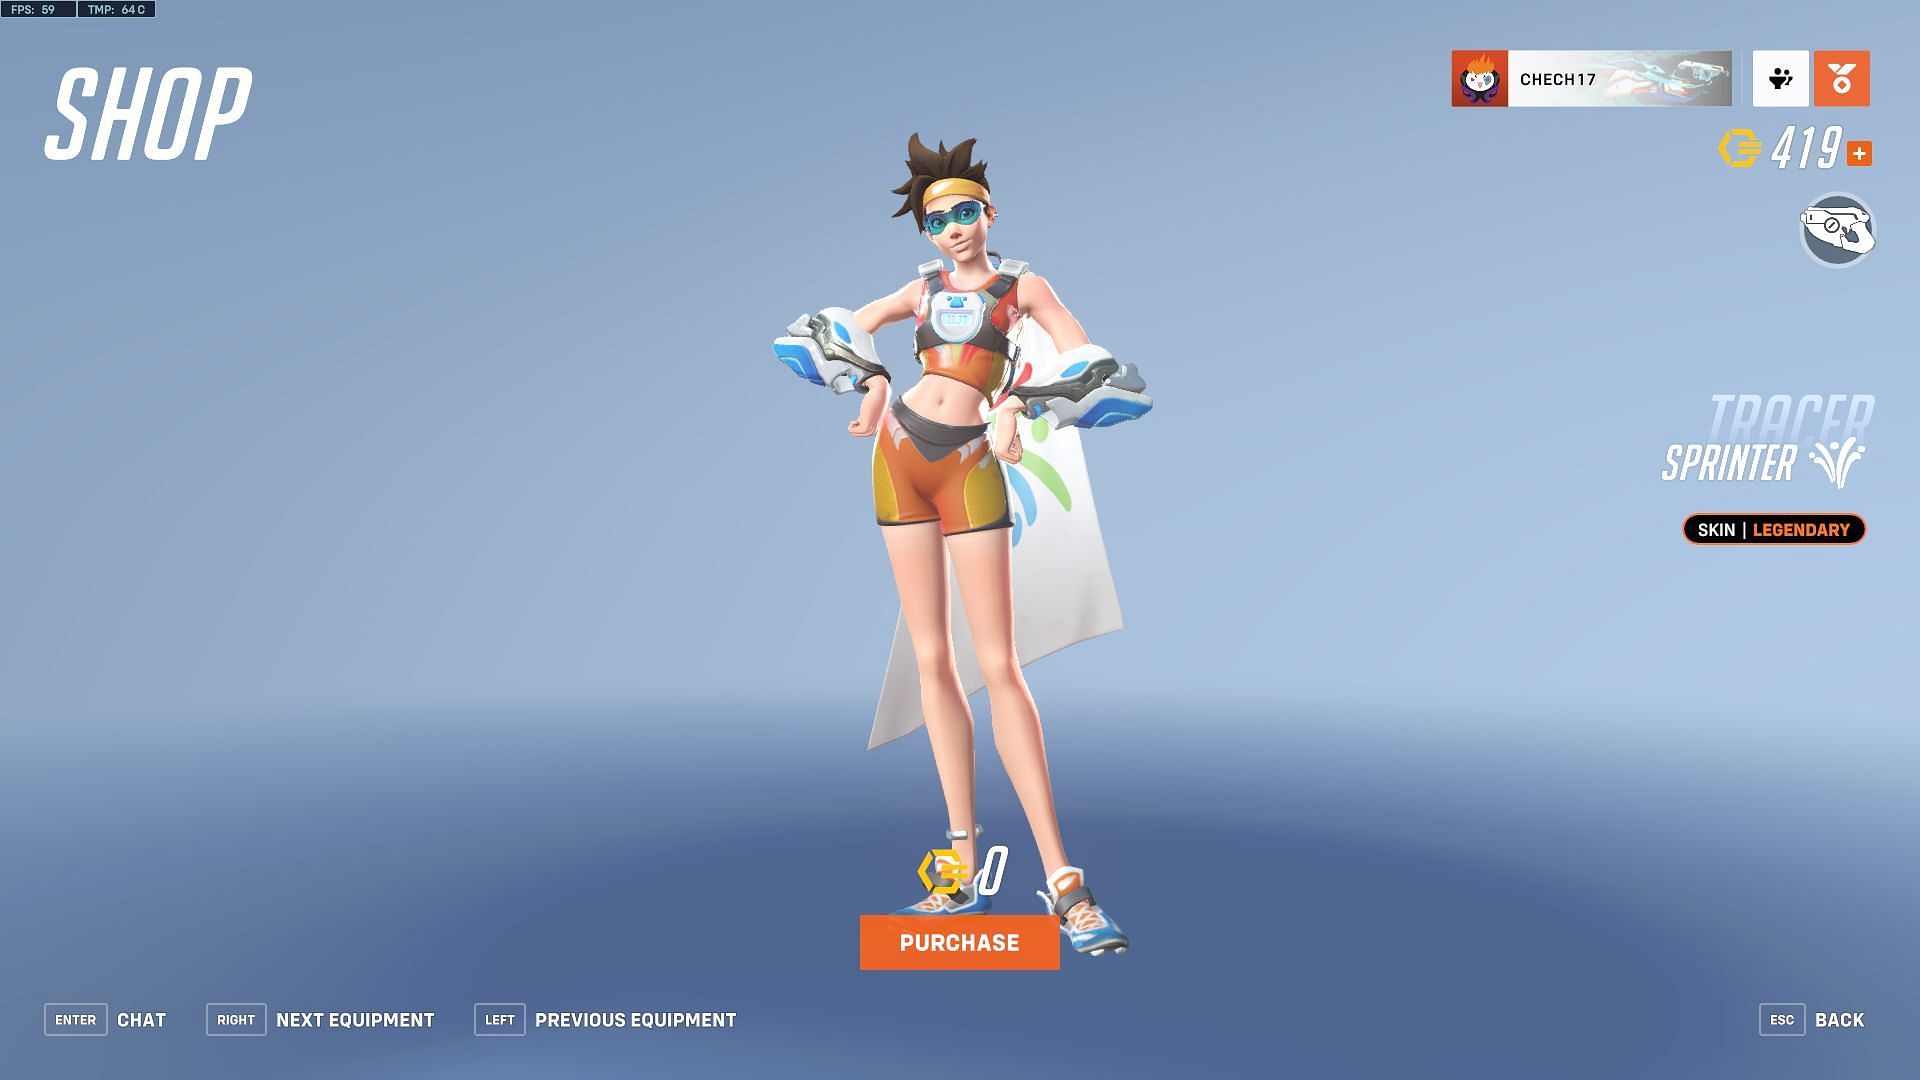 Grab A Free Legendary Tracer Skin In Overwatch 2 For A Limited